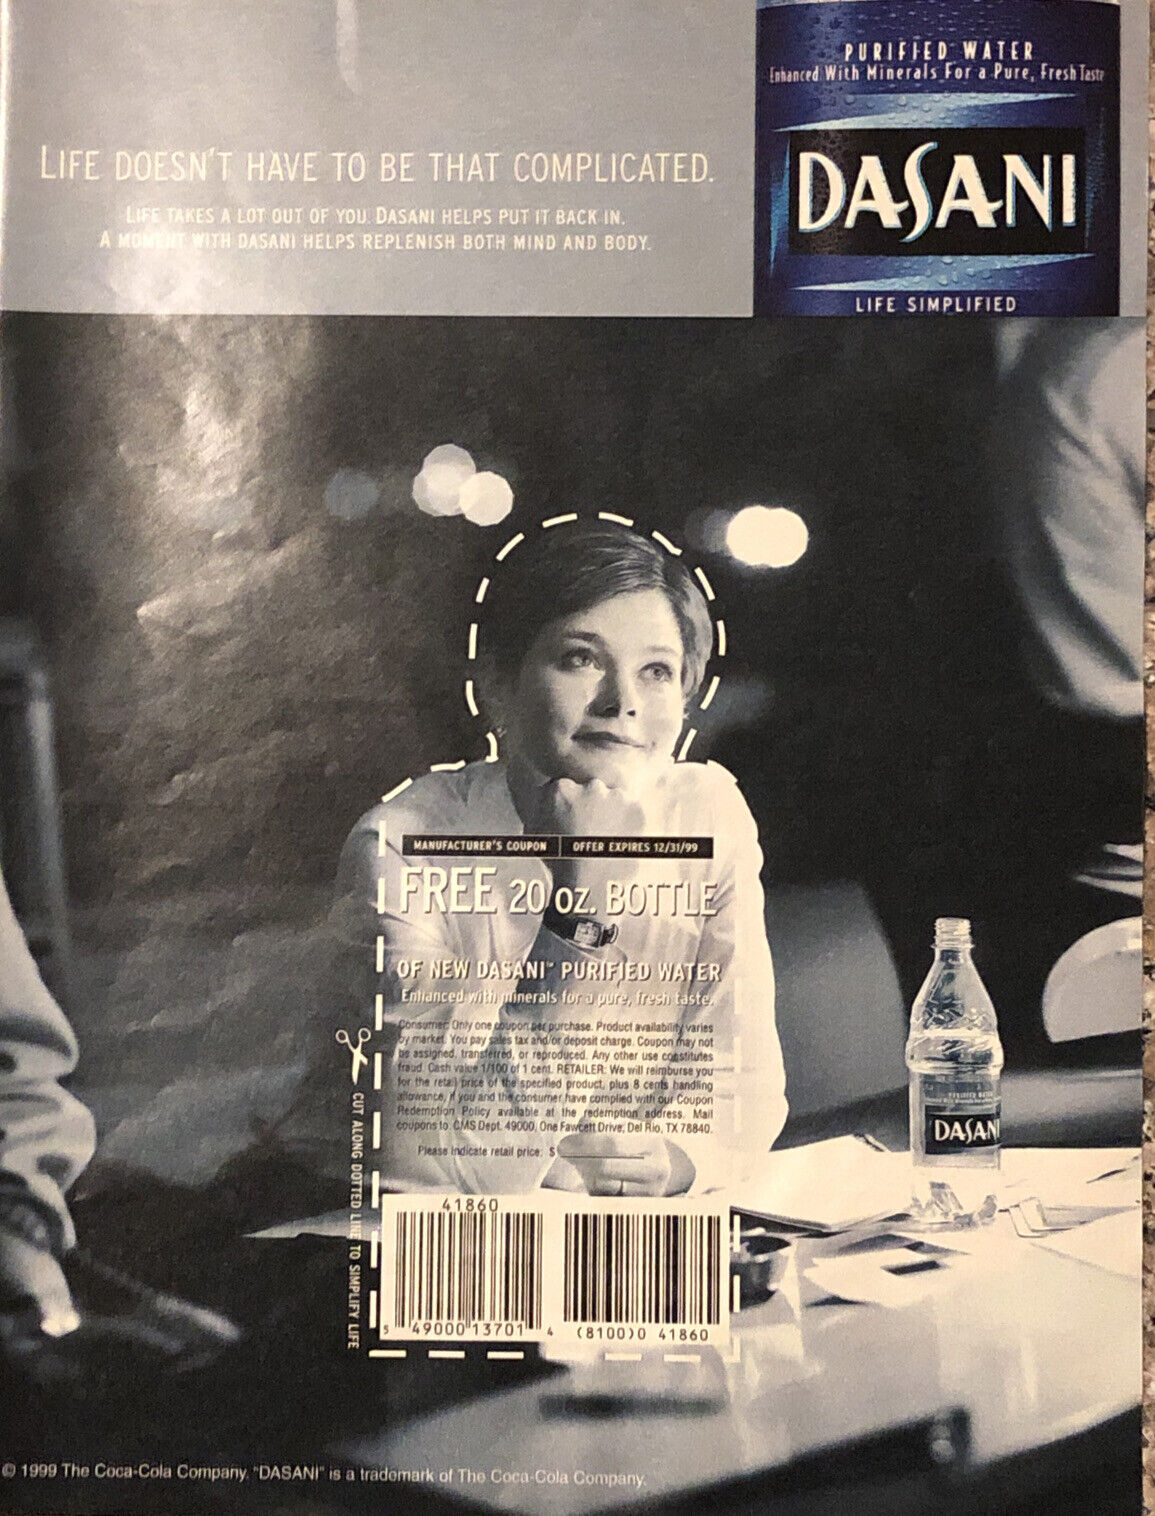 Dasani Bottled Water VTG 1990s PRINT AD 1999 Life Doesn’t Have To Be Complicated